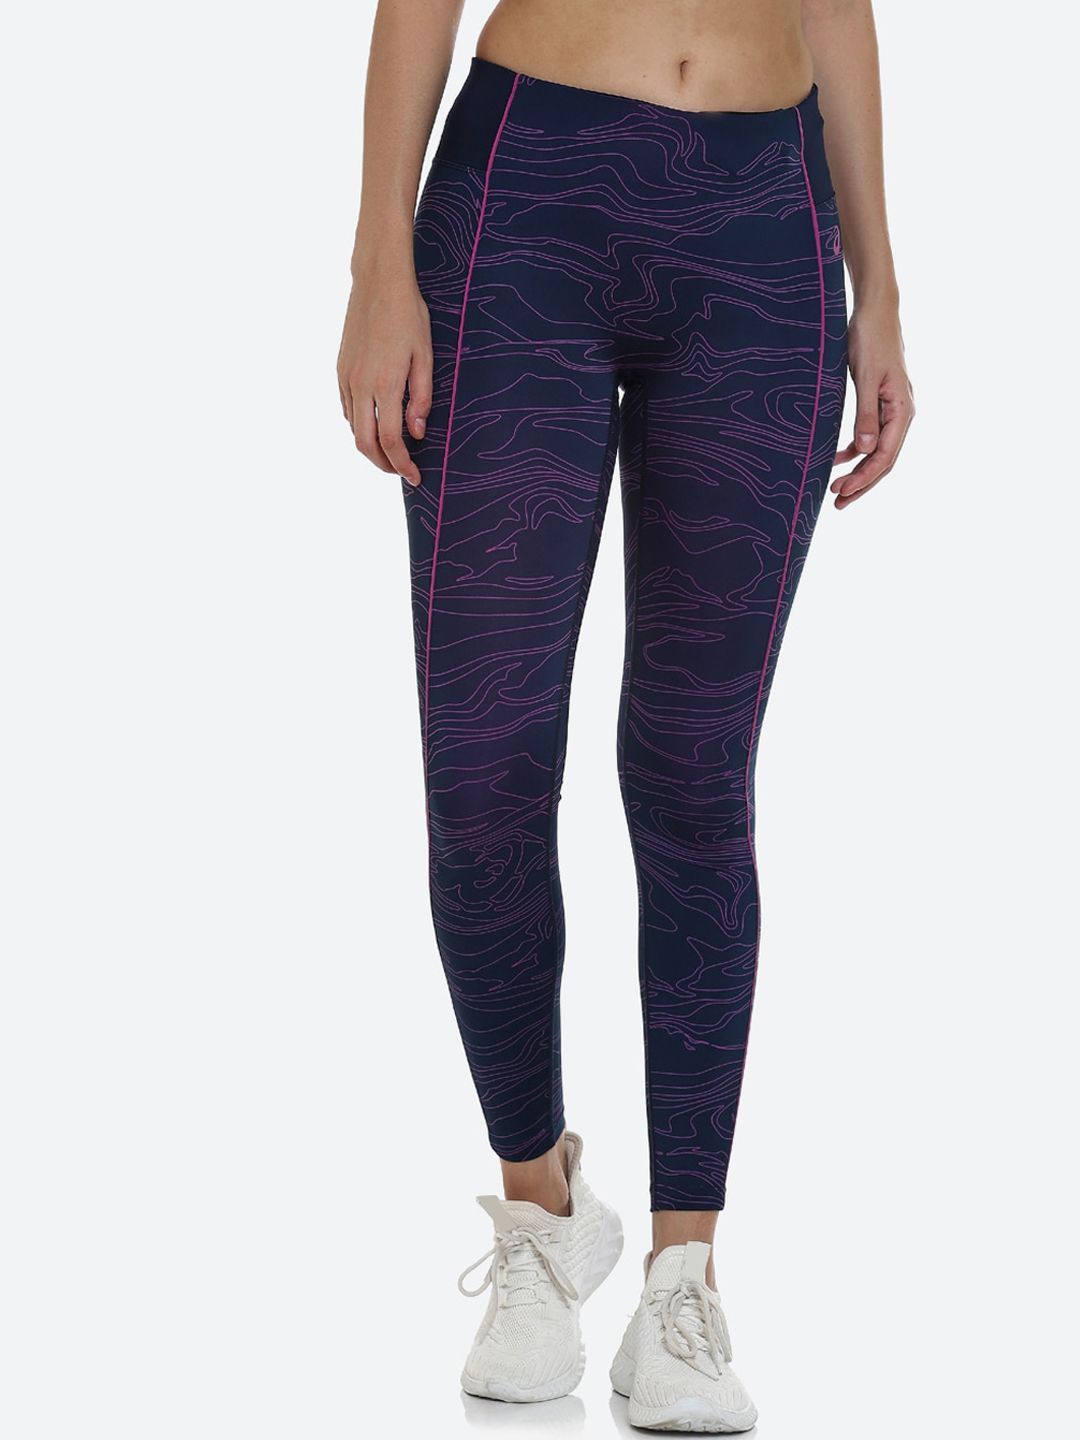 ASICS Women Blue & Purple Printed Piping GPX Tights Price in India